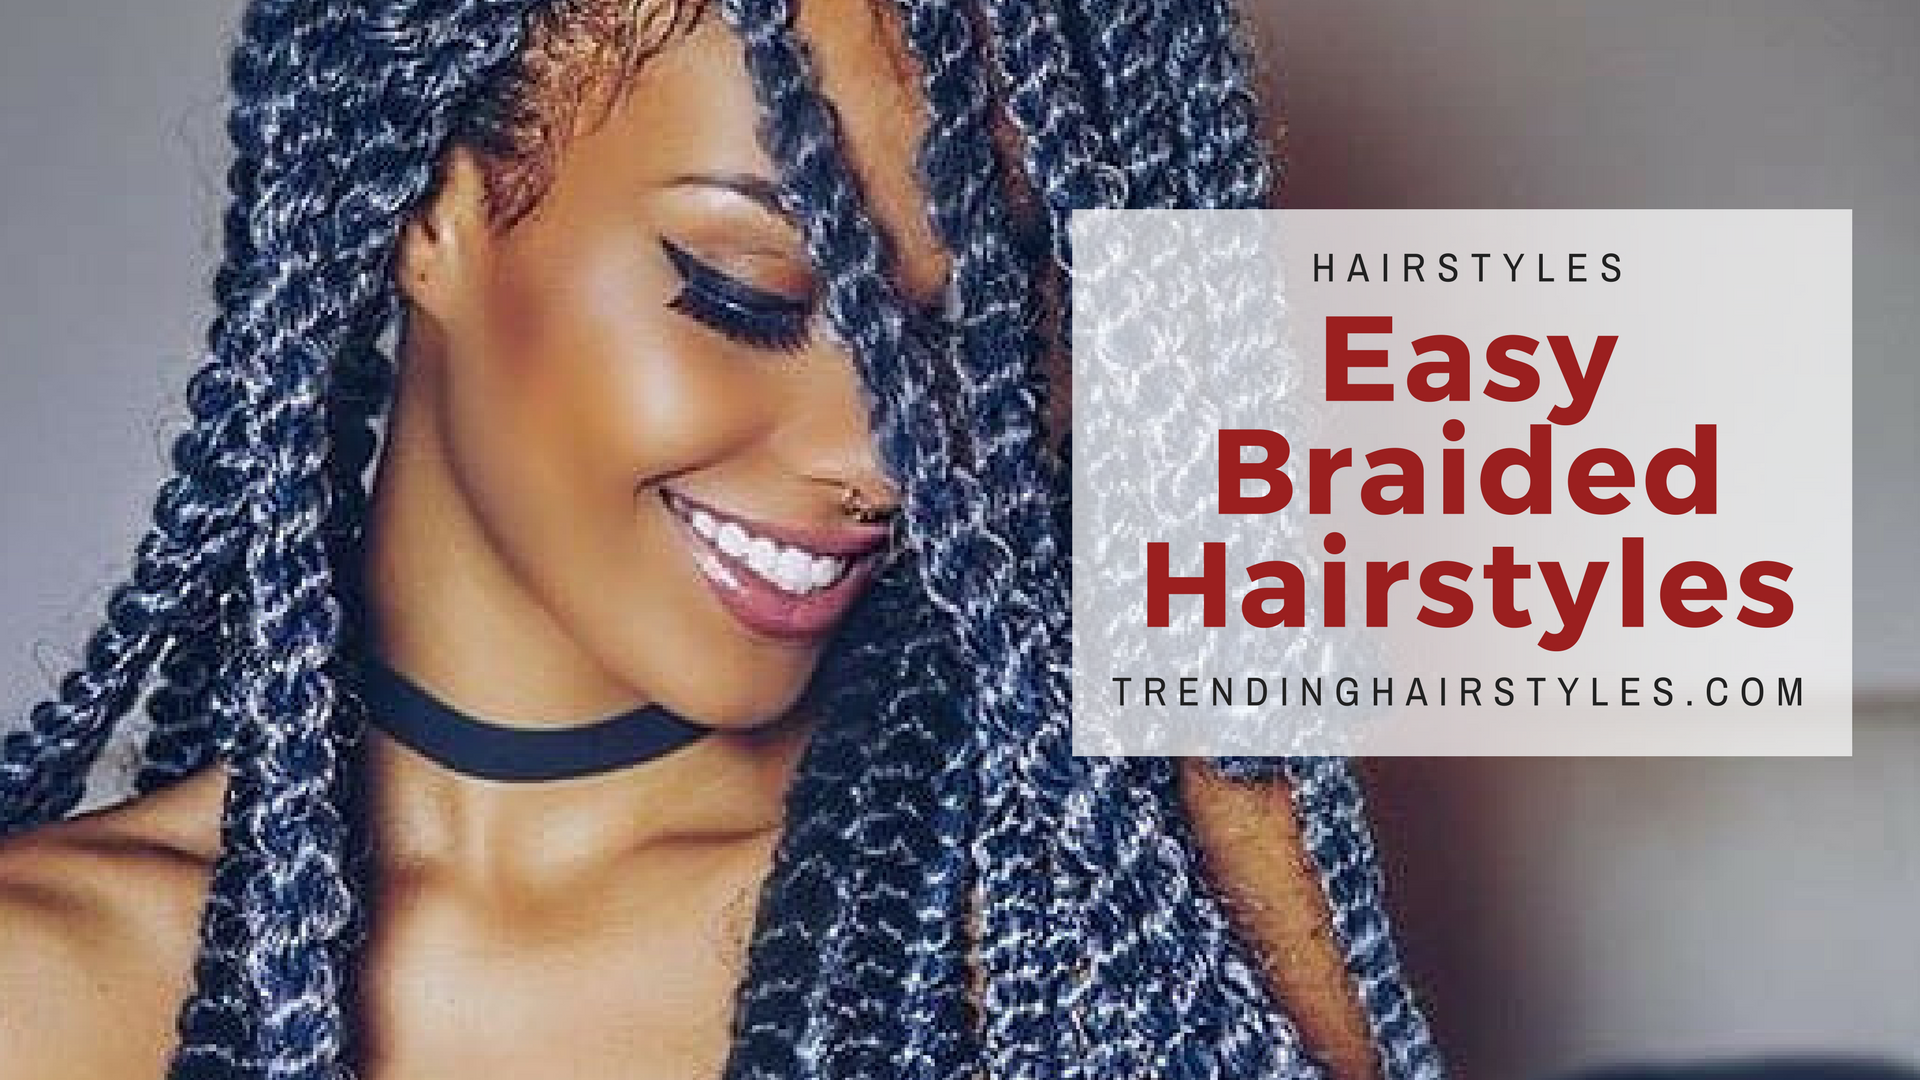 Easy Braided Hairstyles Top 5 Amazing New Braids For Black Women